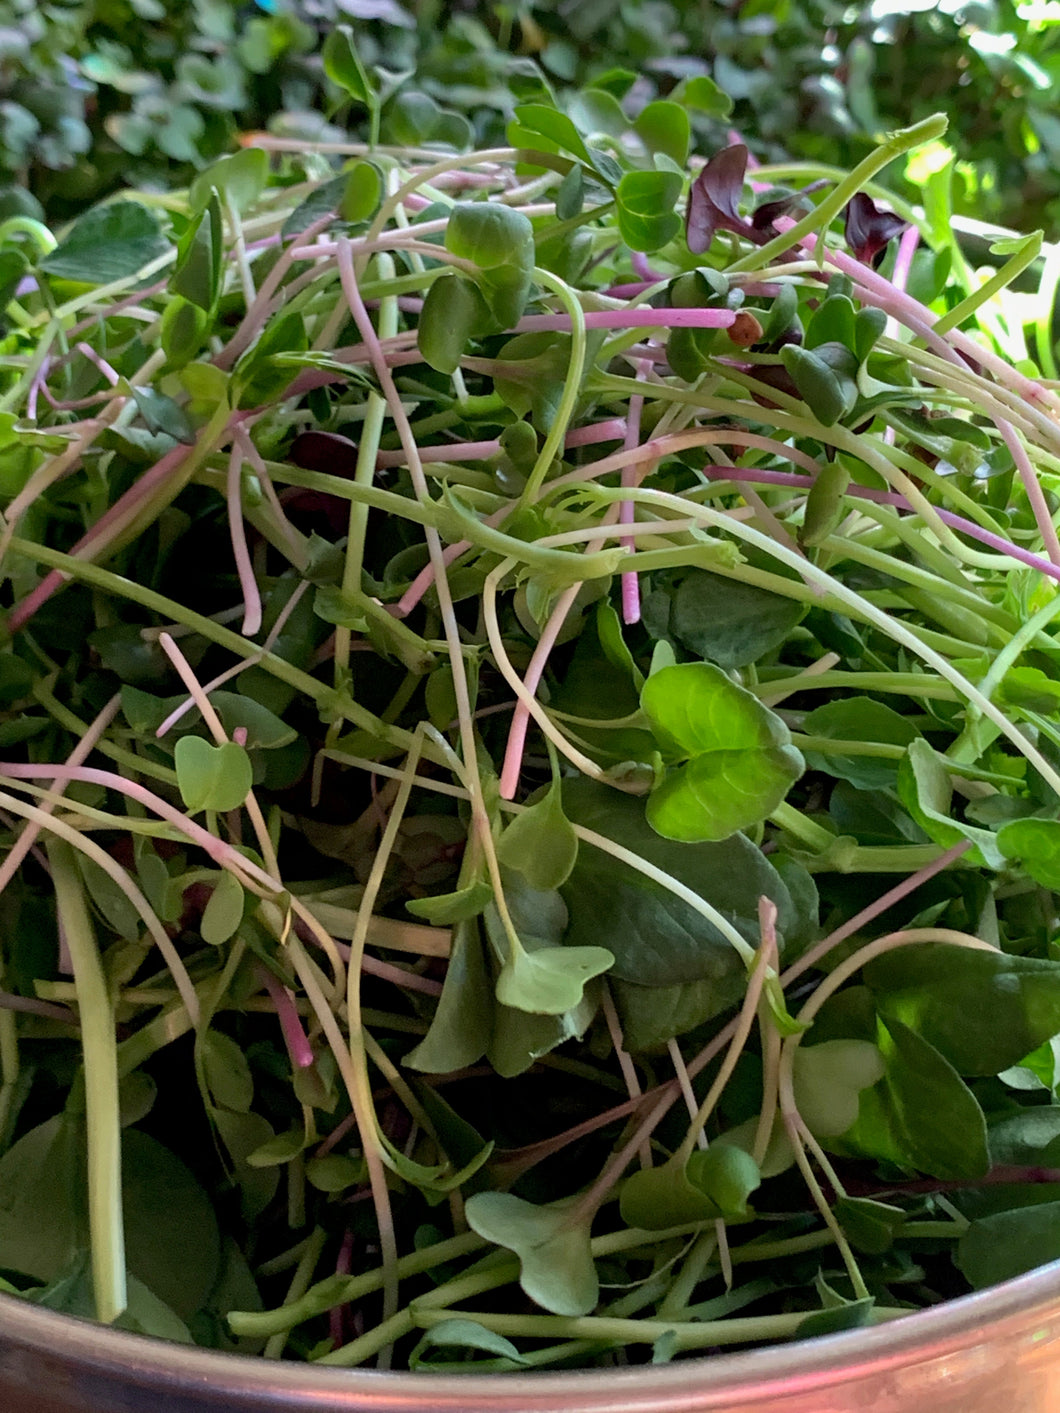 Option B - Free Climb CSA Membership - Stress Buster Microgreen Salad Mix - 3 oz container - You can add this item to any CSA membership or order it alone - Urban Field Pizza and Market, Longmont Co - Pick-Up Spot <br> This is our most popular item!